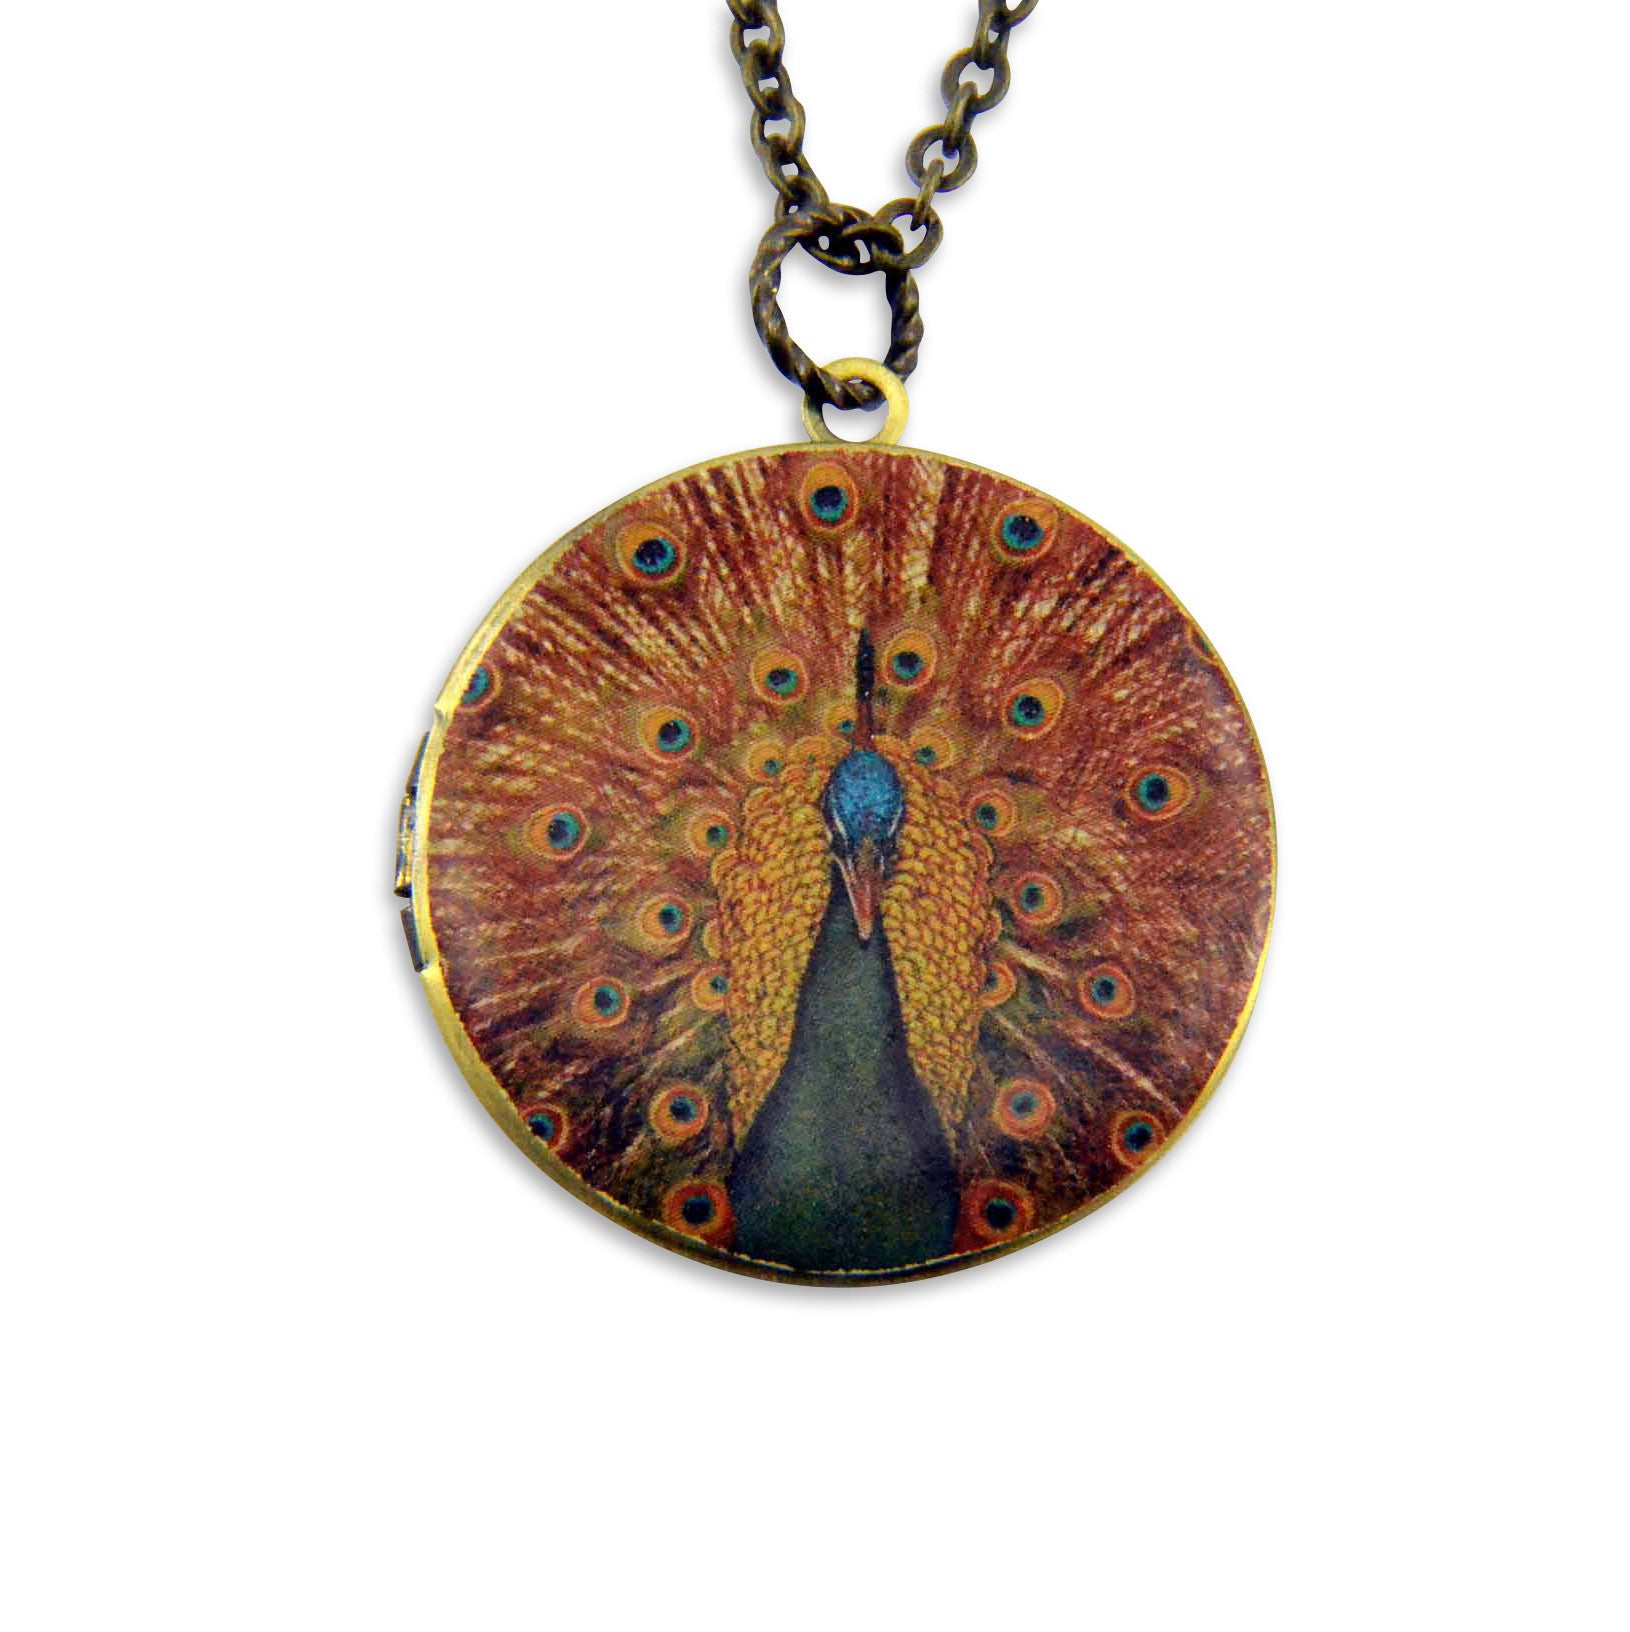 Mrs. Peacock Vintage Theme Photo Locket - Gwen Delicious Jewelry Designs